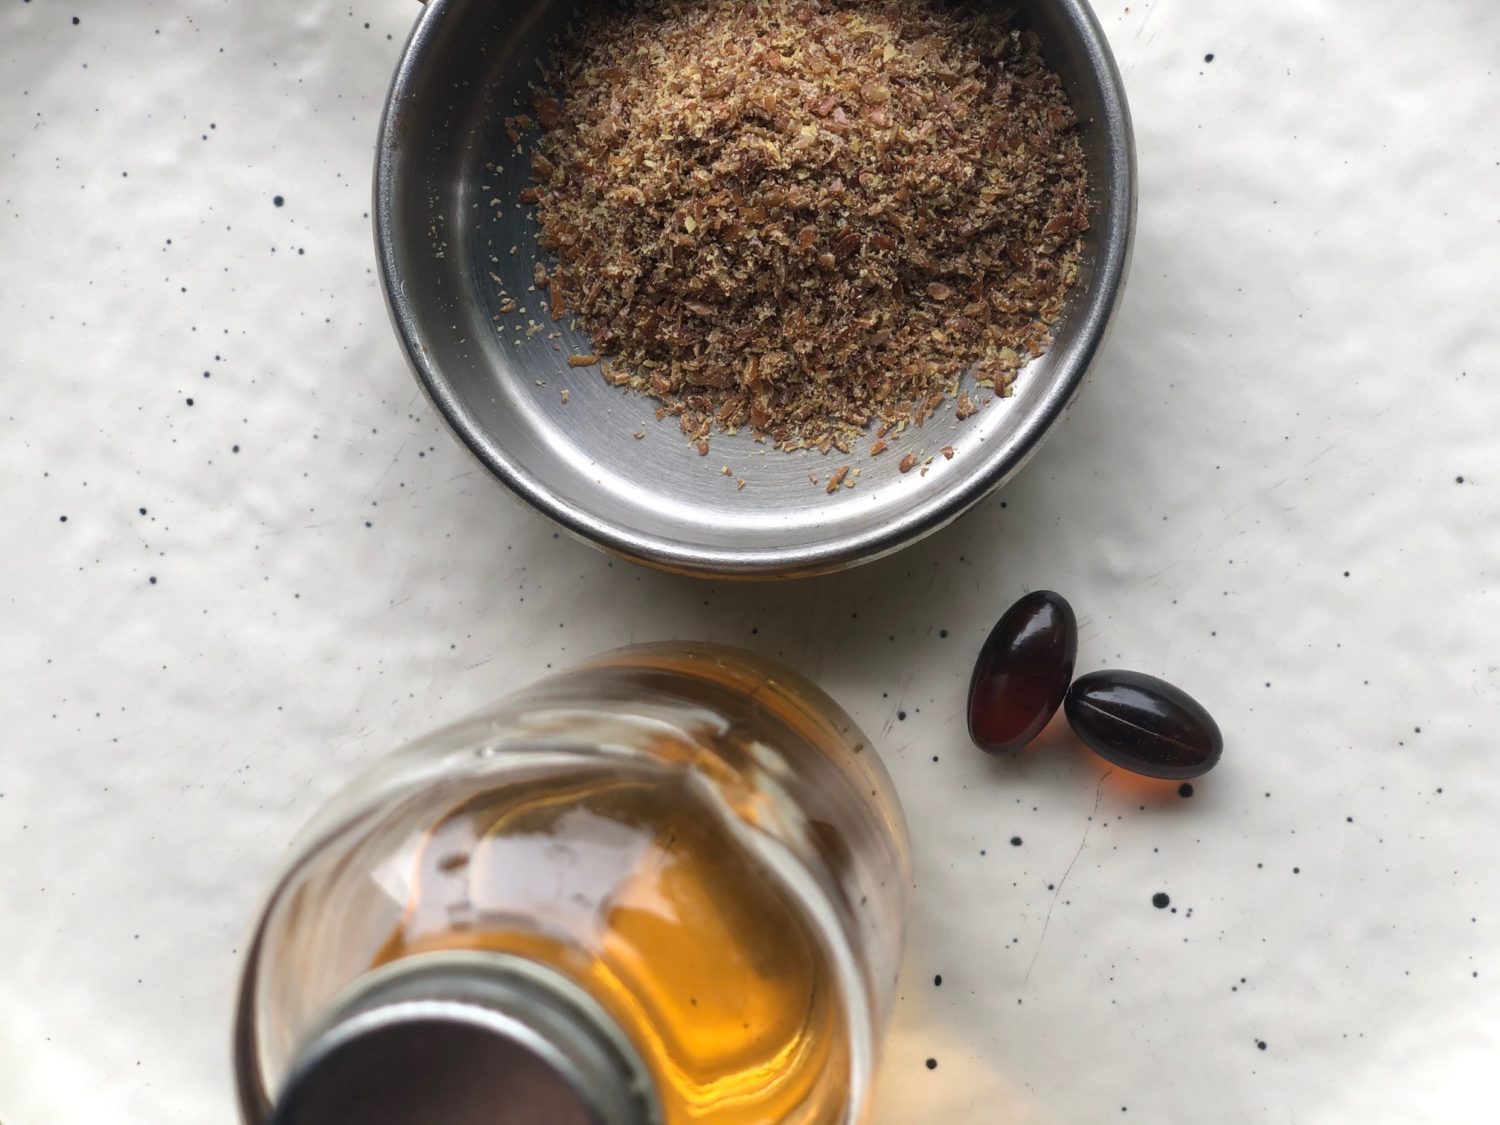 A Vivacity Acupuncture photograph showing various ways to consume Omega-3 essential oils from flax: as a liquid oil (bottom left), as softgel capsules (center right) and as a ground seed meal (center top).